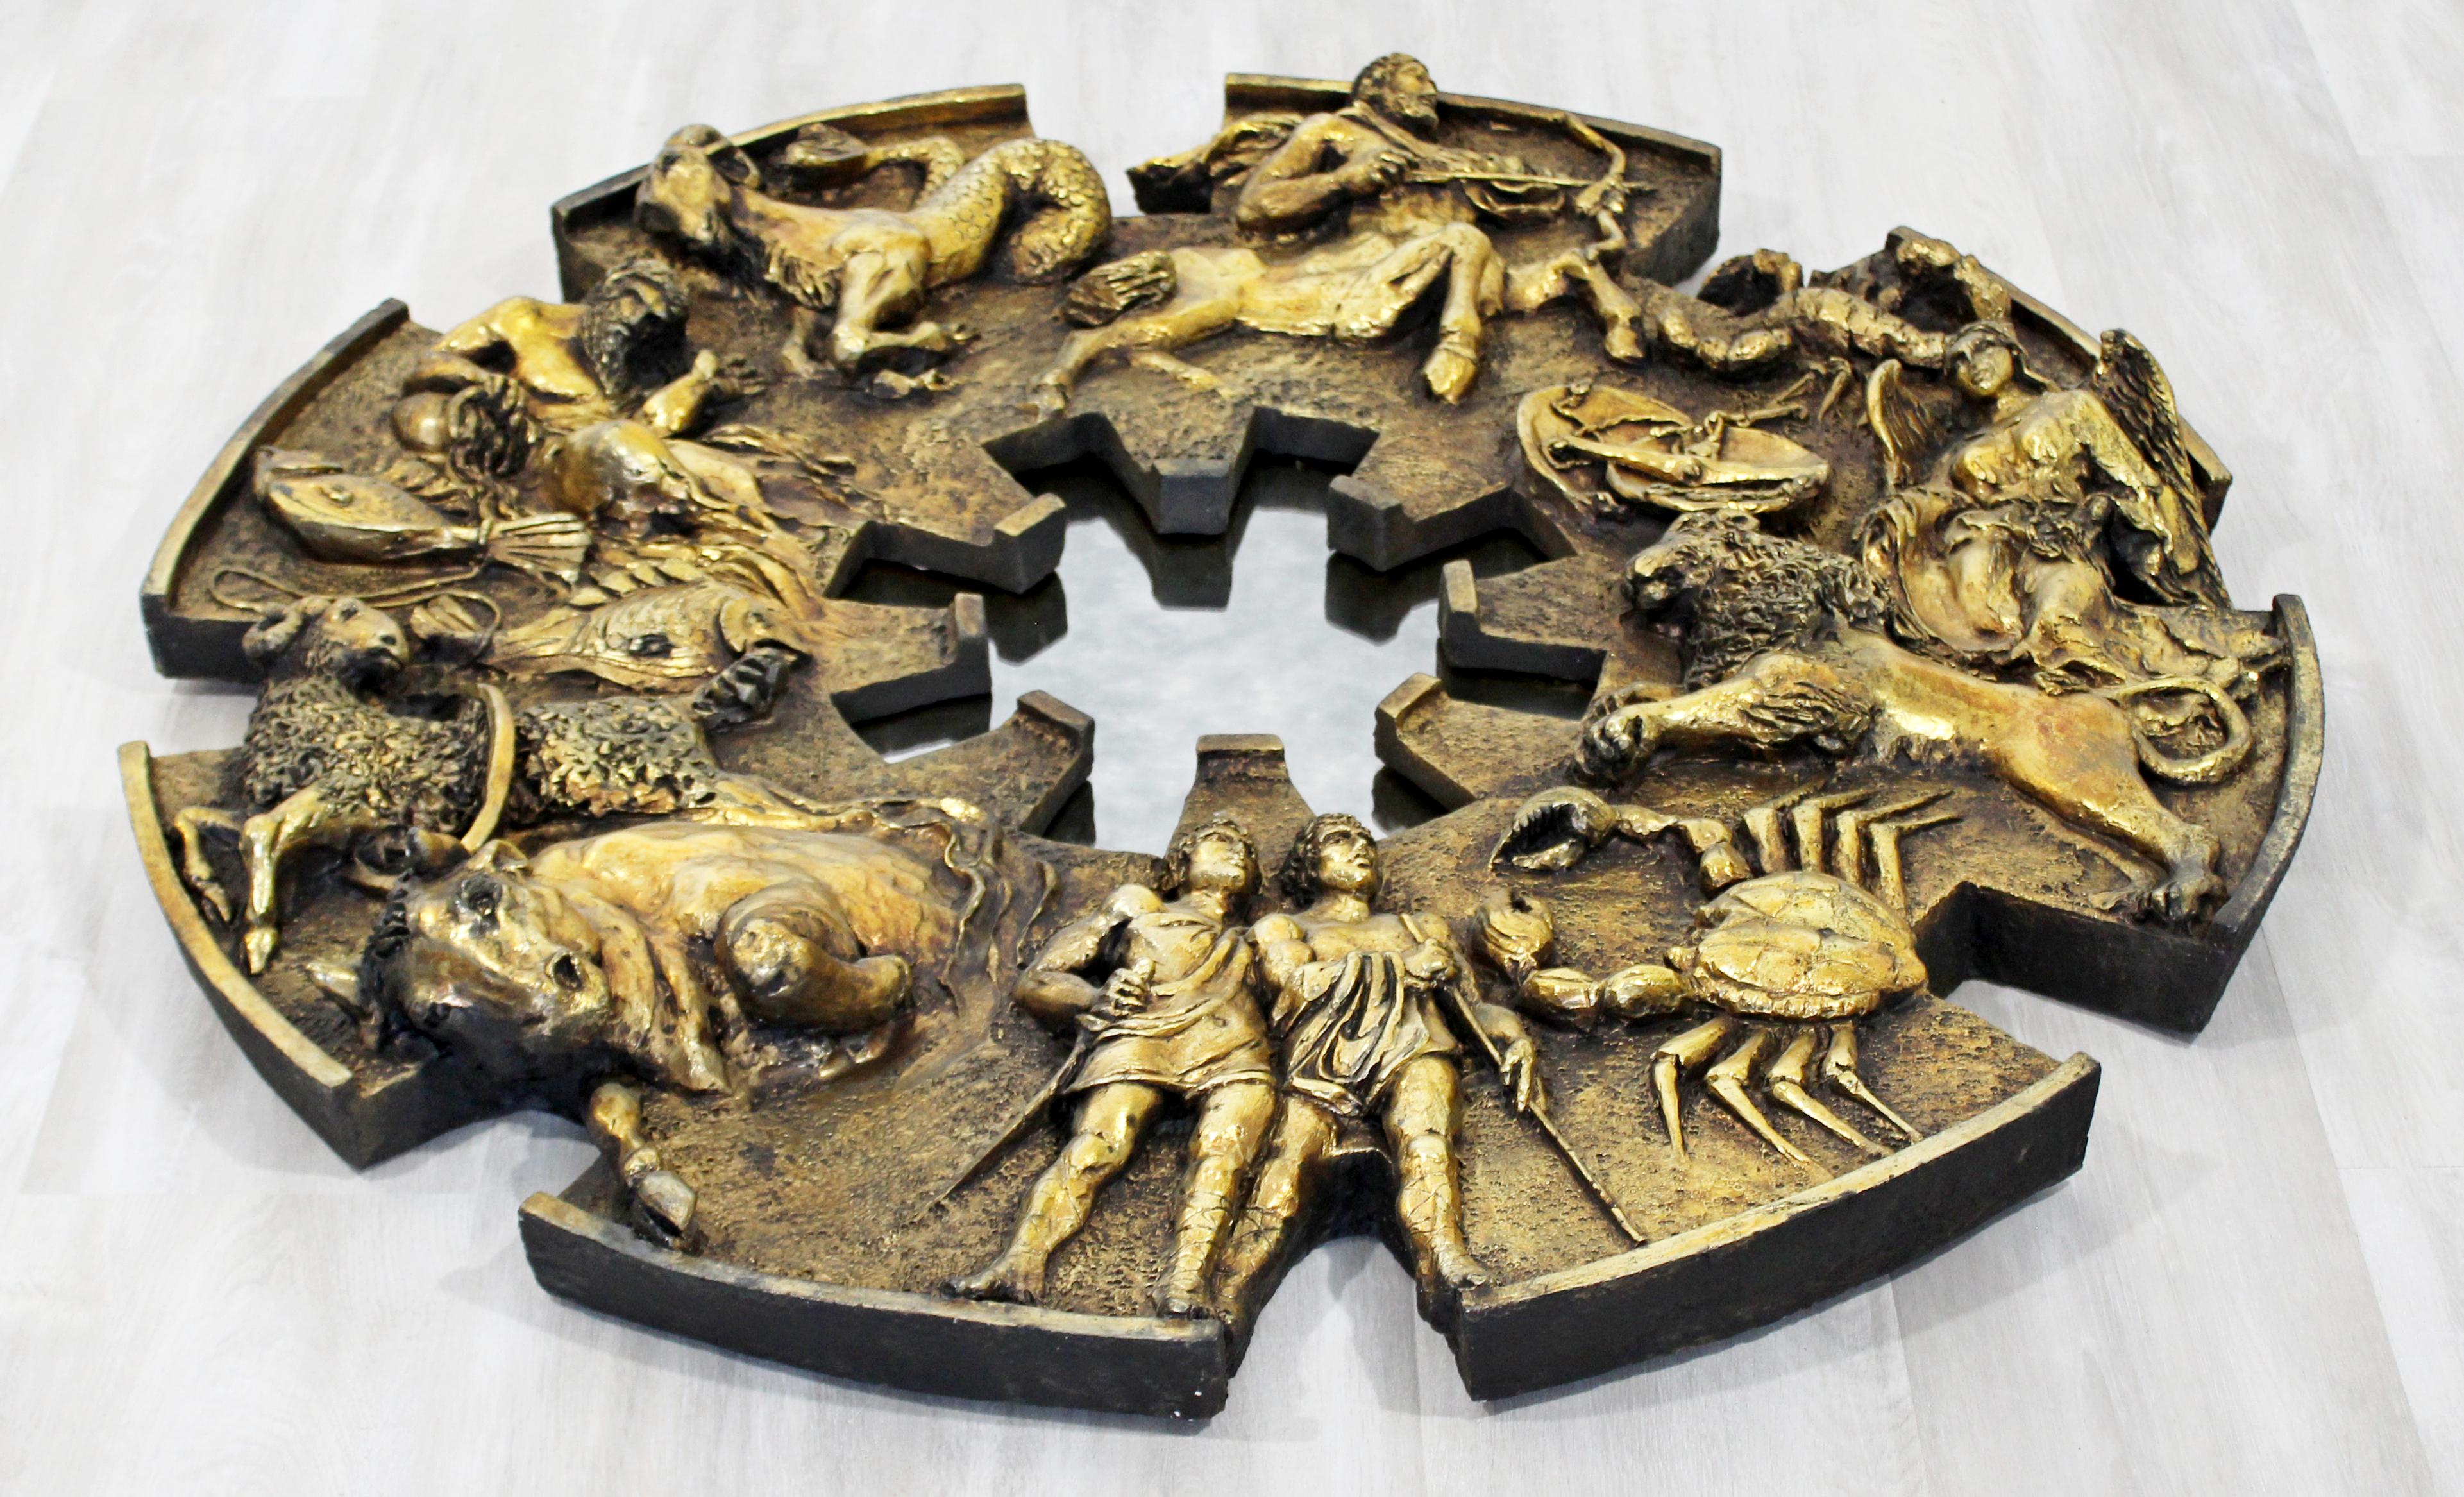 For your consideration is a phenomenal,brass finish fiberglass wall relief mirror, with the Zodiac representations, by Finesse Originals, circa 1960s. In excellent vintage condition. The dimensions are 39